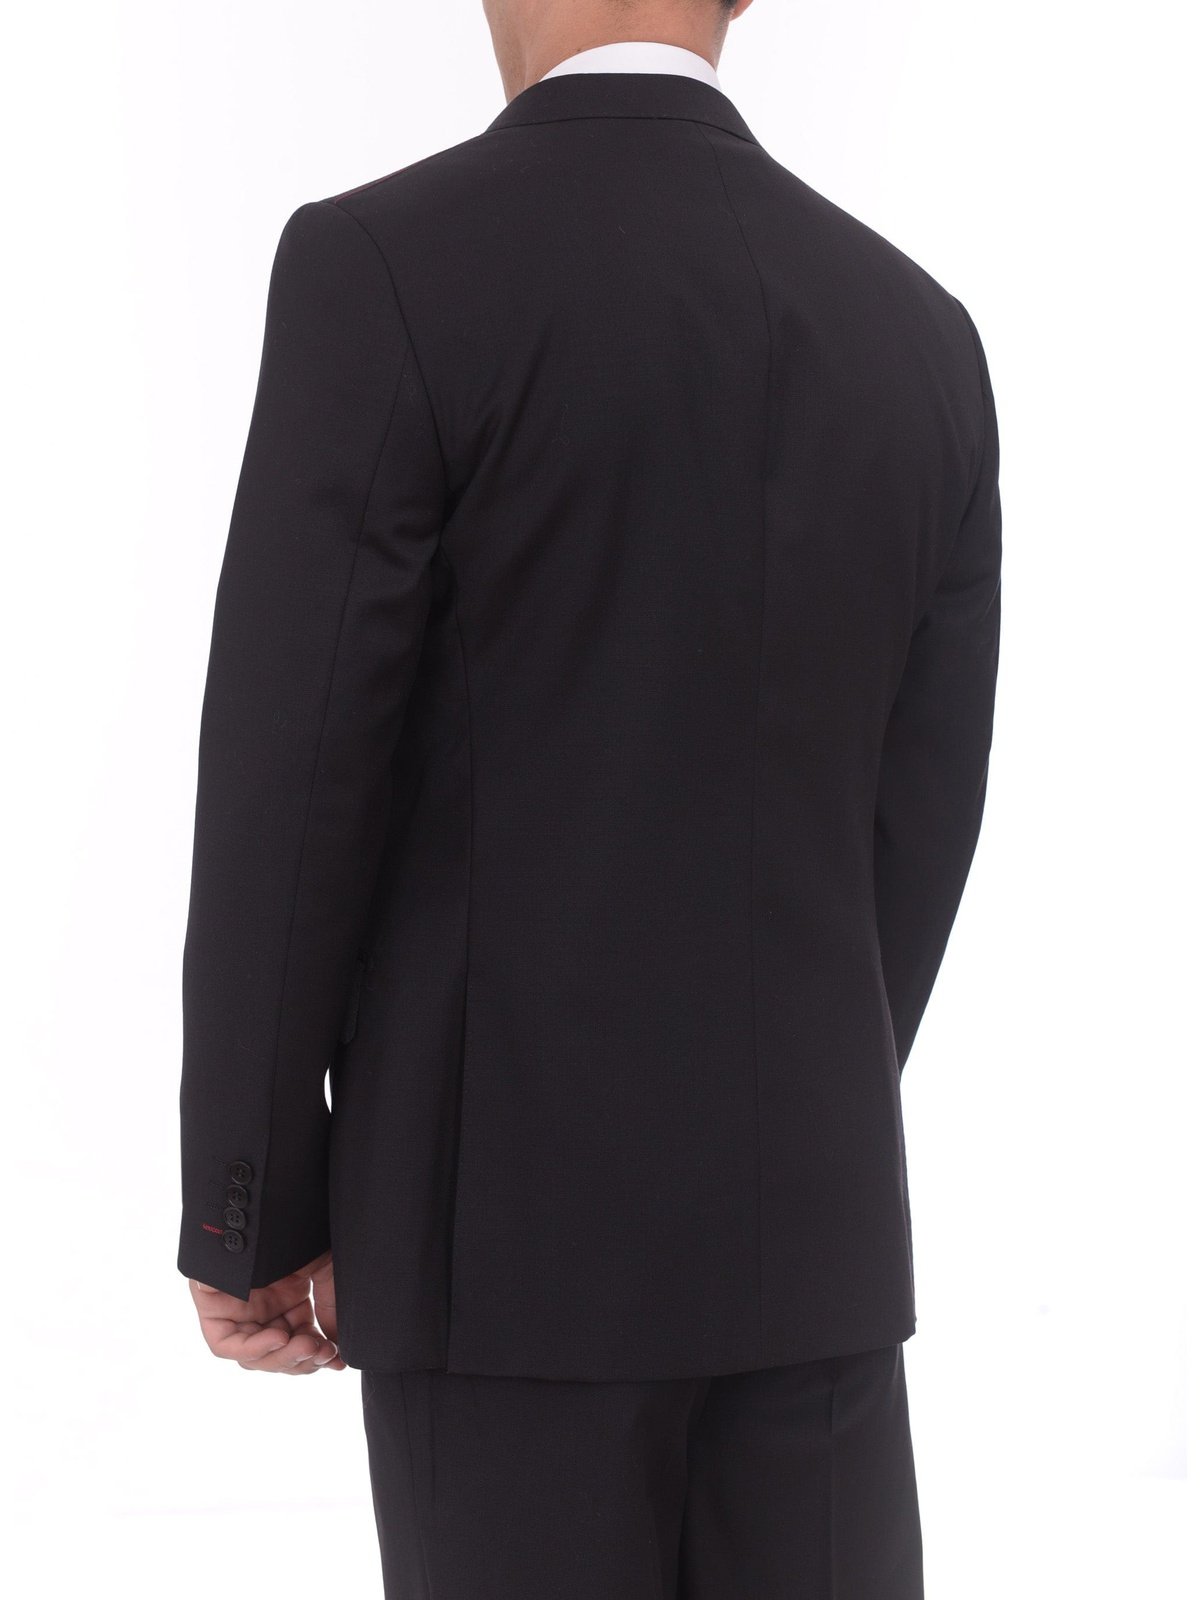 LVs by Levinas TWO PIECE SUITS Men&#39;s Levinas Solid Black Half Canvassed High-End Wool Cashmere 2 Piece Suit